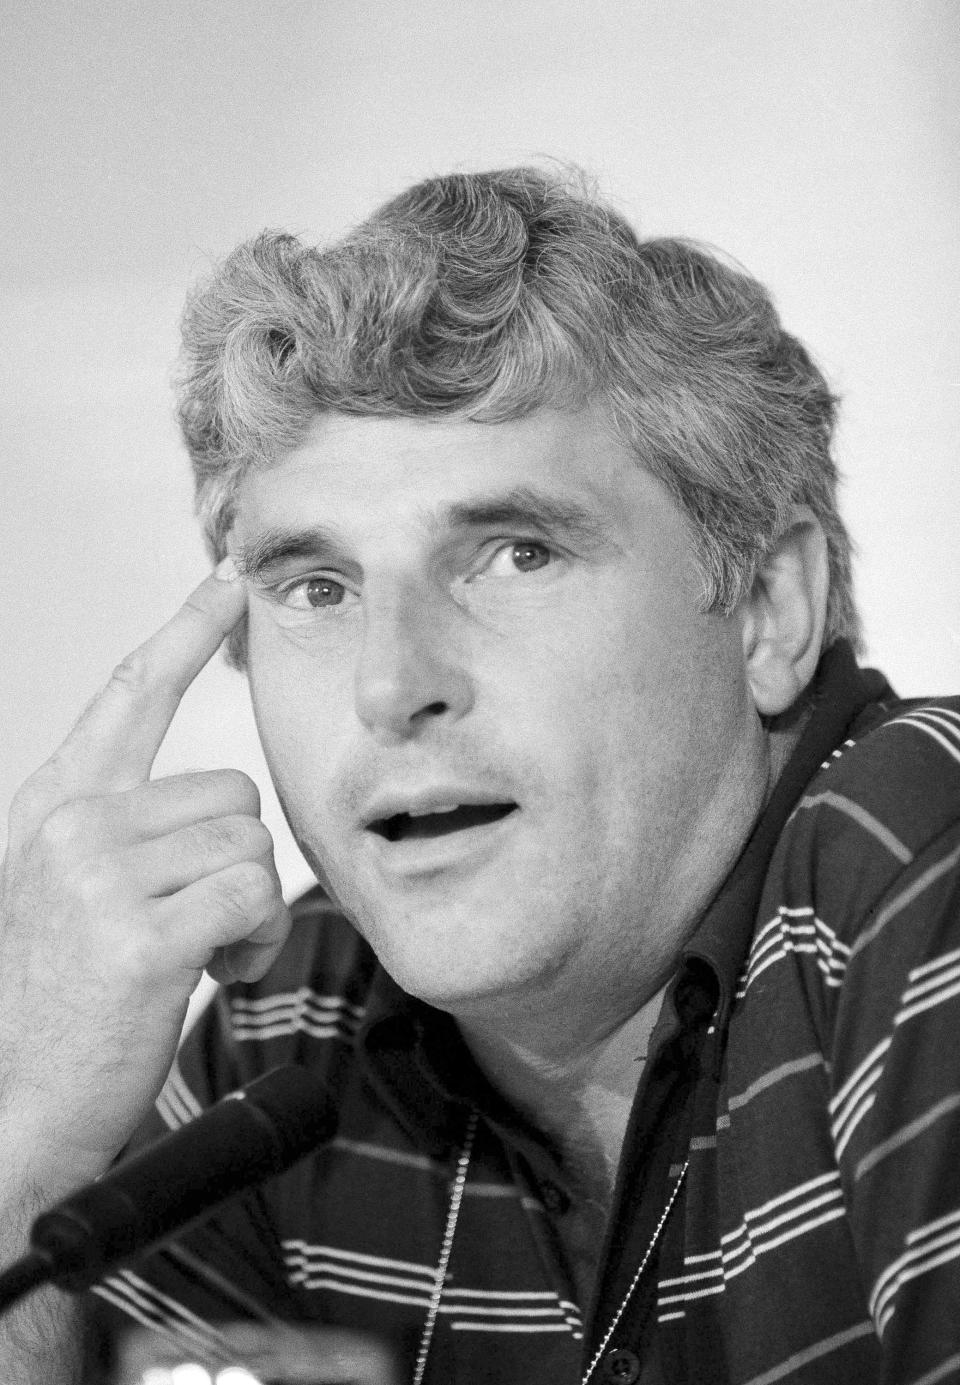 FILE - U.S. Olympic men's basketball coach Bob Knight talks during a news conference in July 1984 in Los Angeles. Knight, the brilliant and combustible coach who won three NCAA titles at Indiana and for years was the scowling face of college basketball, has died. He was 83. Knight's family made the announcement on social media on Wednesday night, Nov. 1, 2023, saying he was surrounded by family members at his home in Bloomington, Ind. (AP Photo/Lenny Ignelzi)